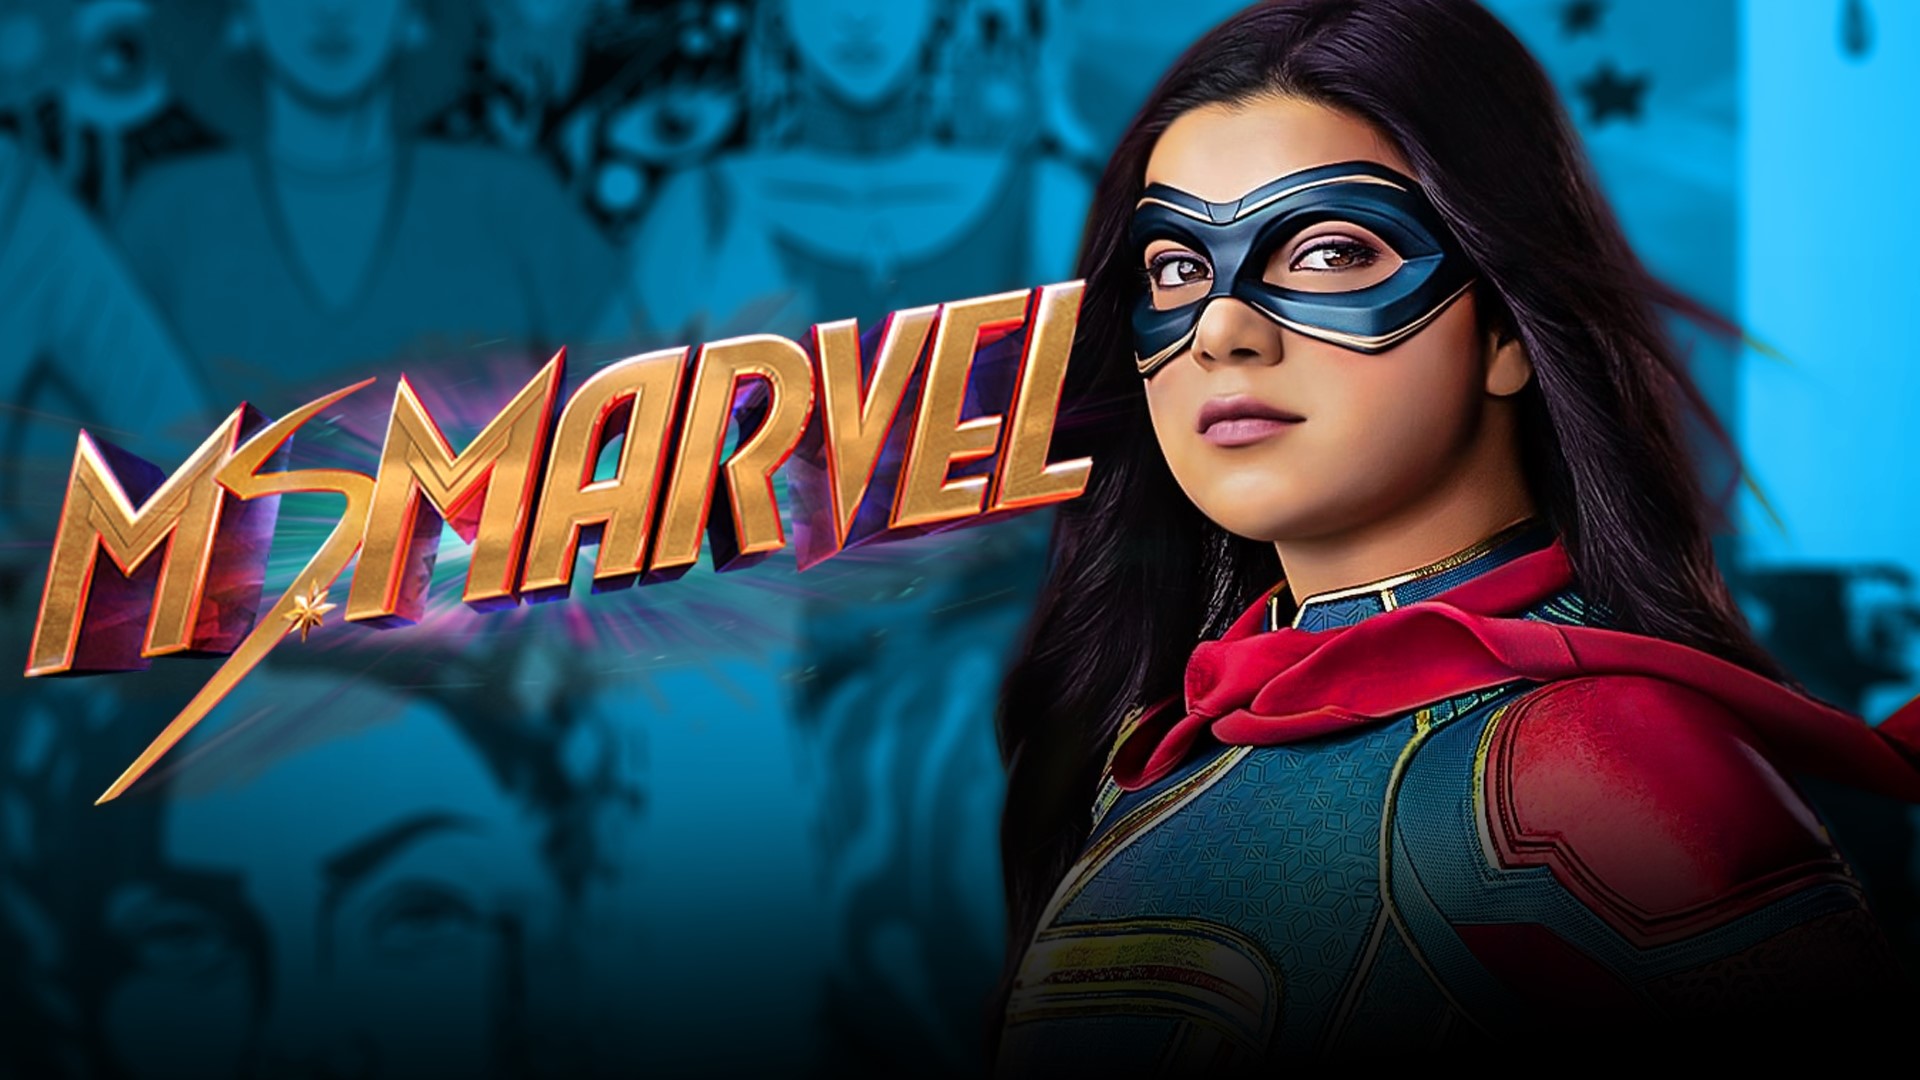 With the finale of Ms. Marvel, the show brings it all together for a cohesive, fun MCU entry that is both enjoyable and educational.